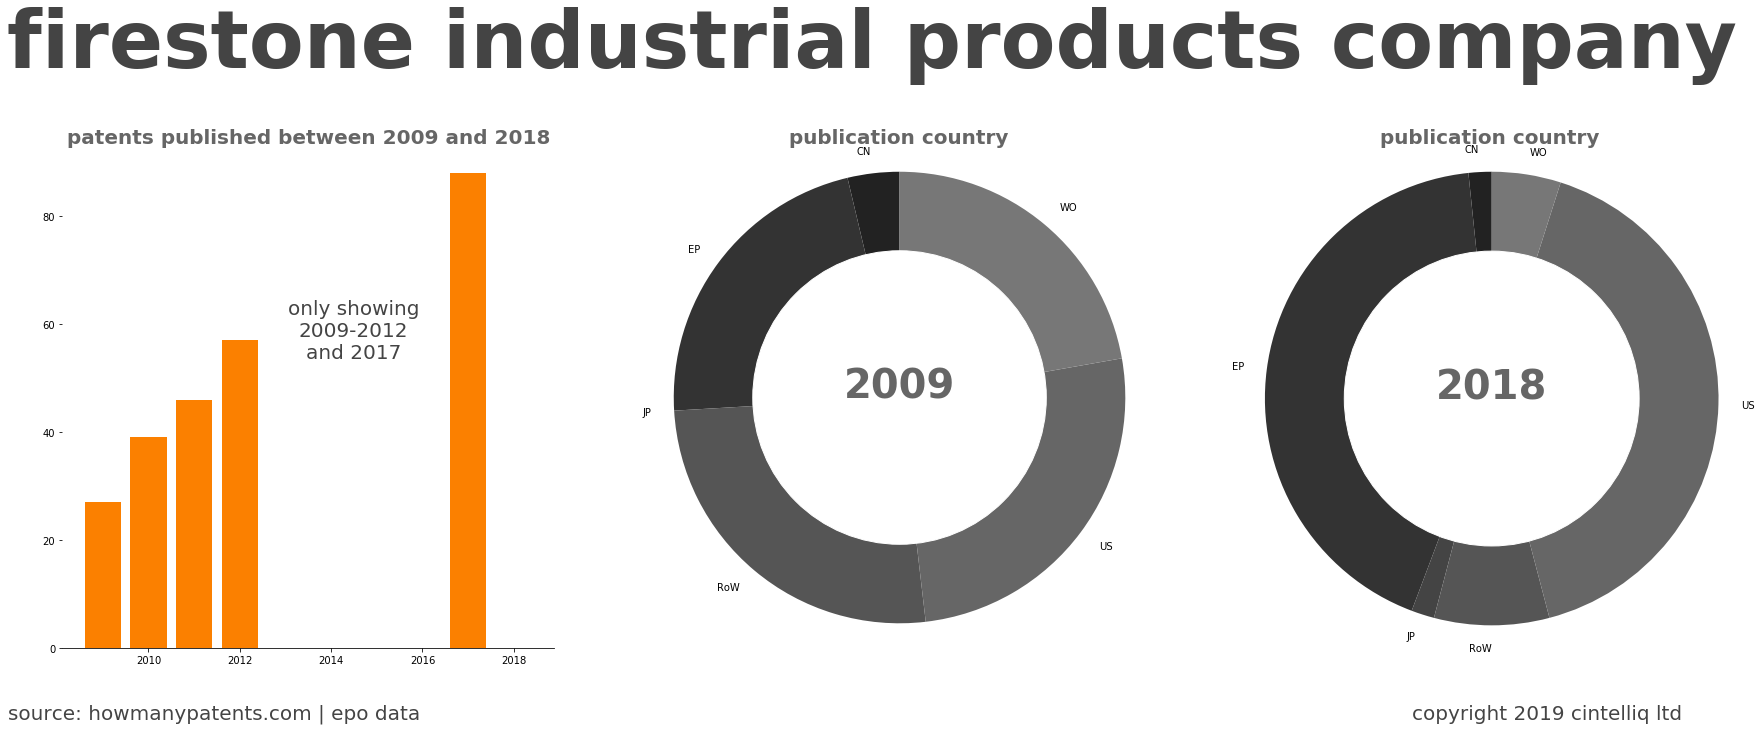 summary of patents for Firestone Industrial Products Company